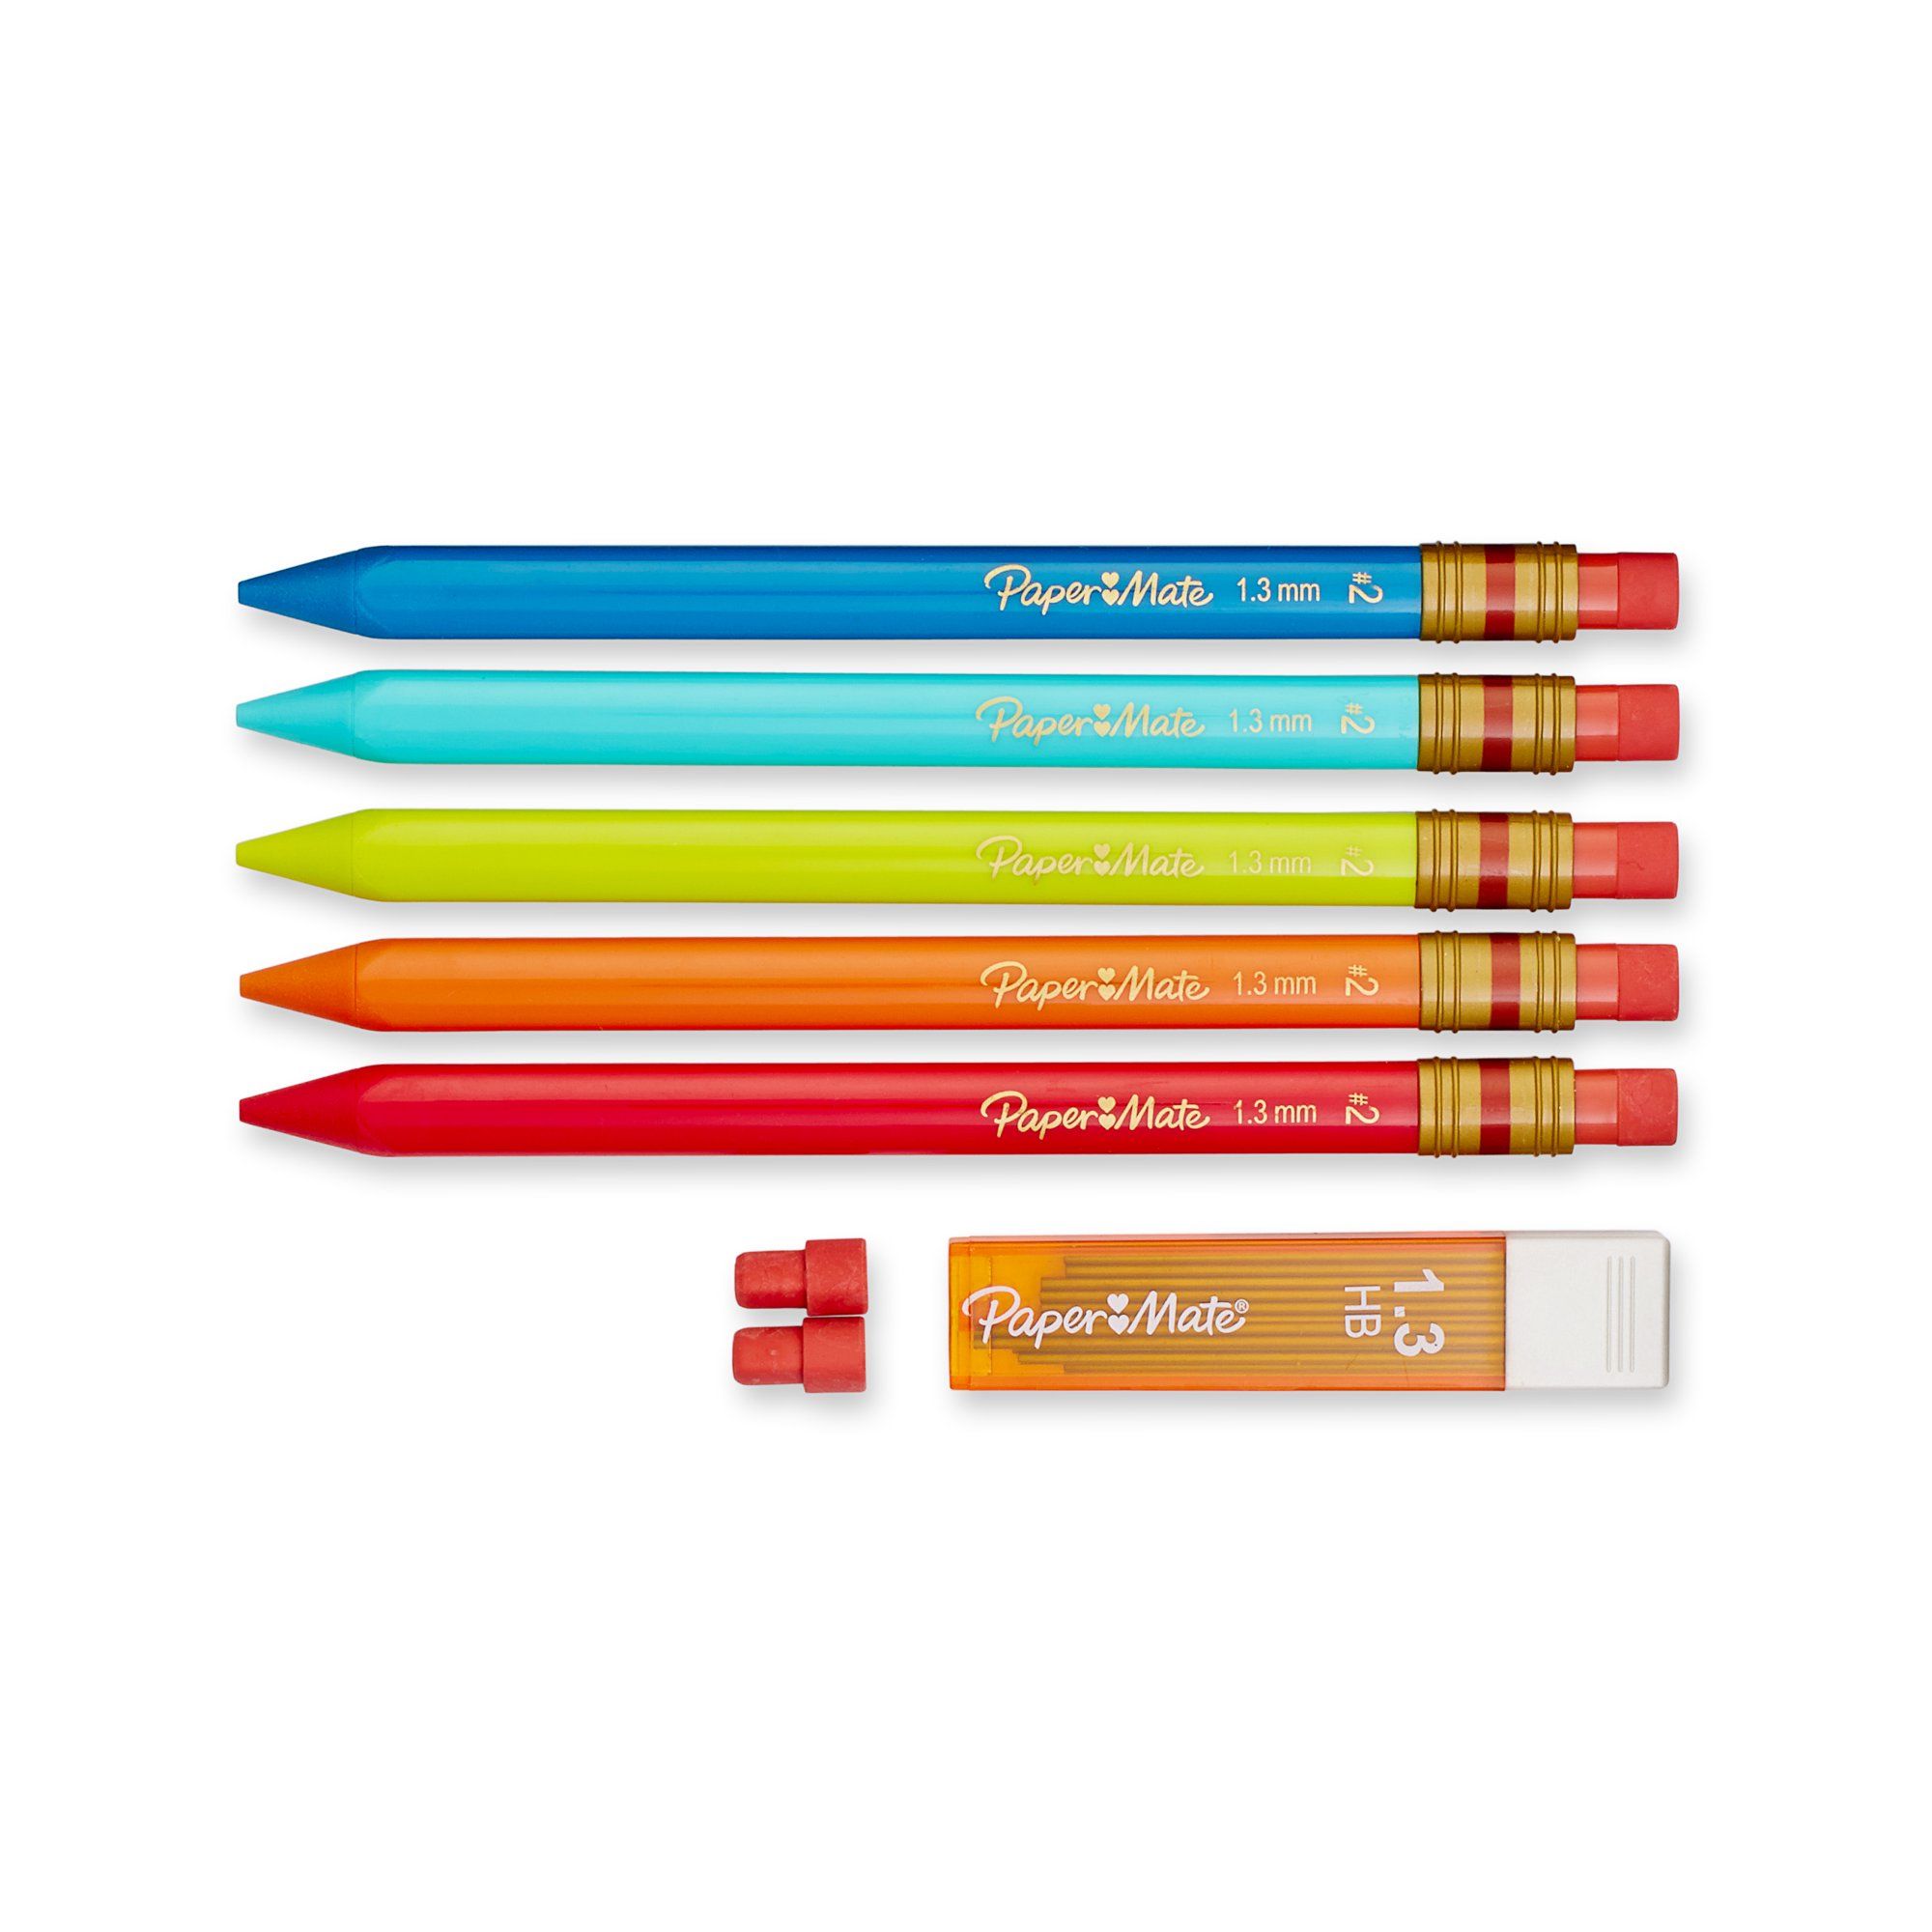 Paper Mate Triangular "Easy To Hold" Mechanical Pencils Kit, #2 HB, Assorted Colors, 4-Count | Walmart (US)